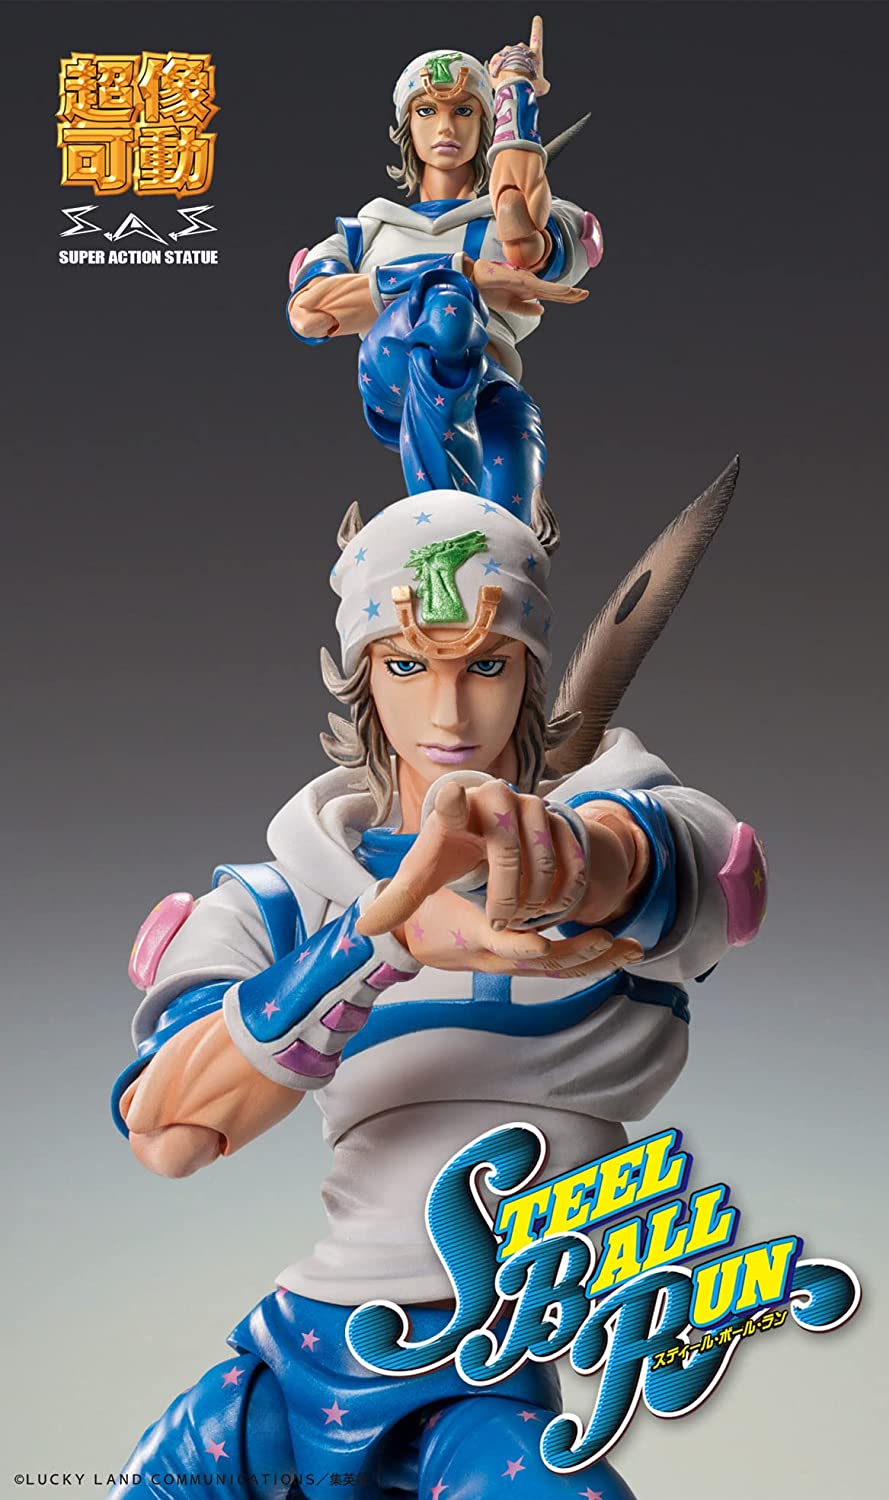 The Steel Ball Run Johnny Joestar Super Action Statue figure is getting a rerelease and will appear again in August 2023